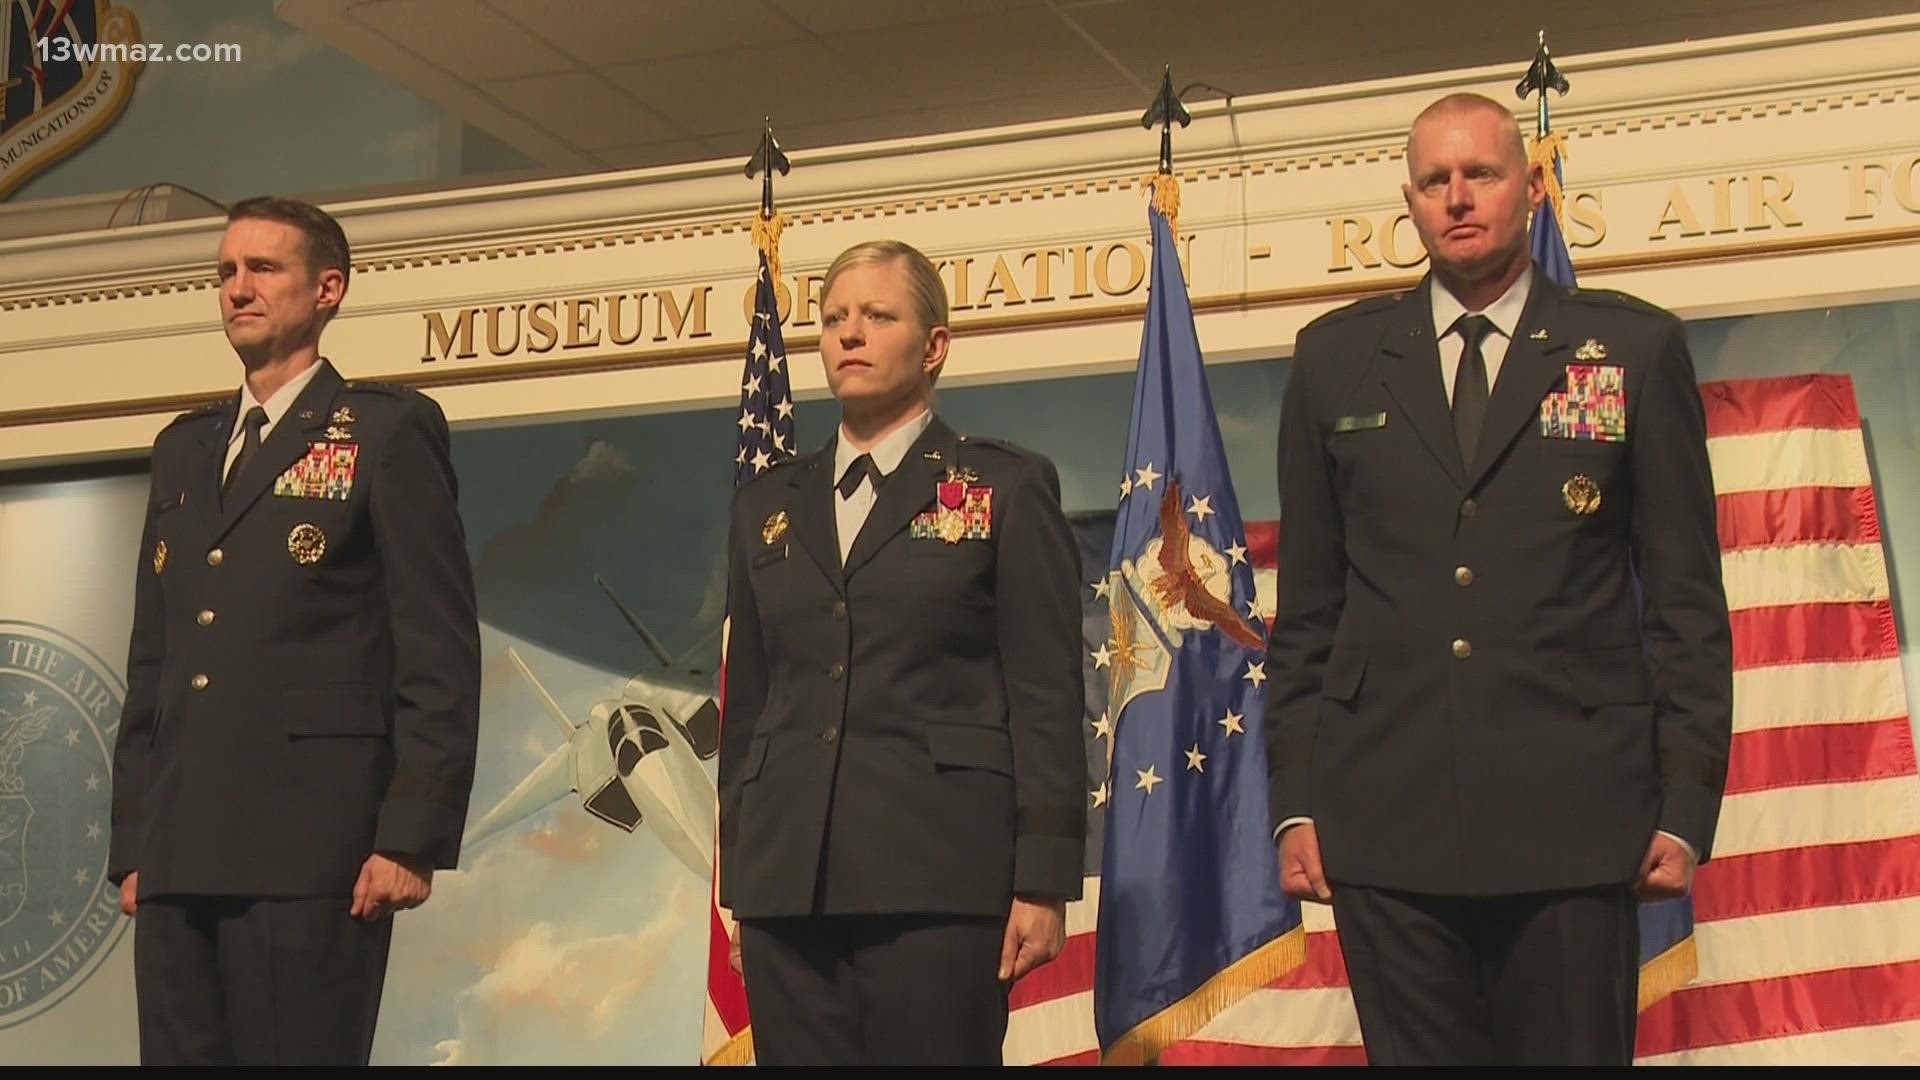 Base and city leaders came together at the Museum of Aviation Tuesday morning for the Change of Command ceremony.